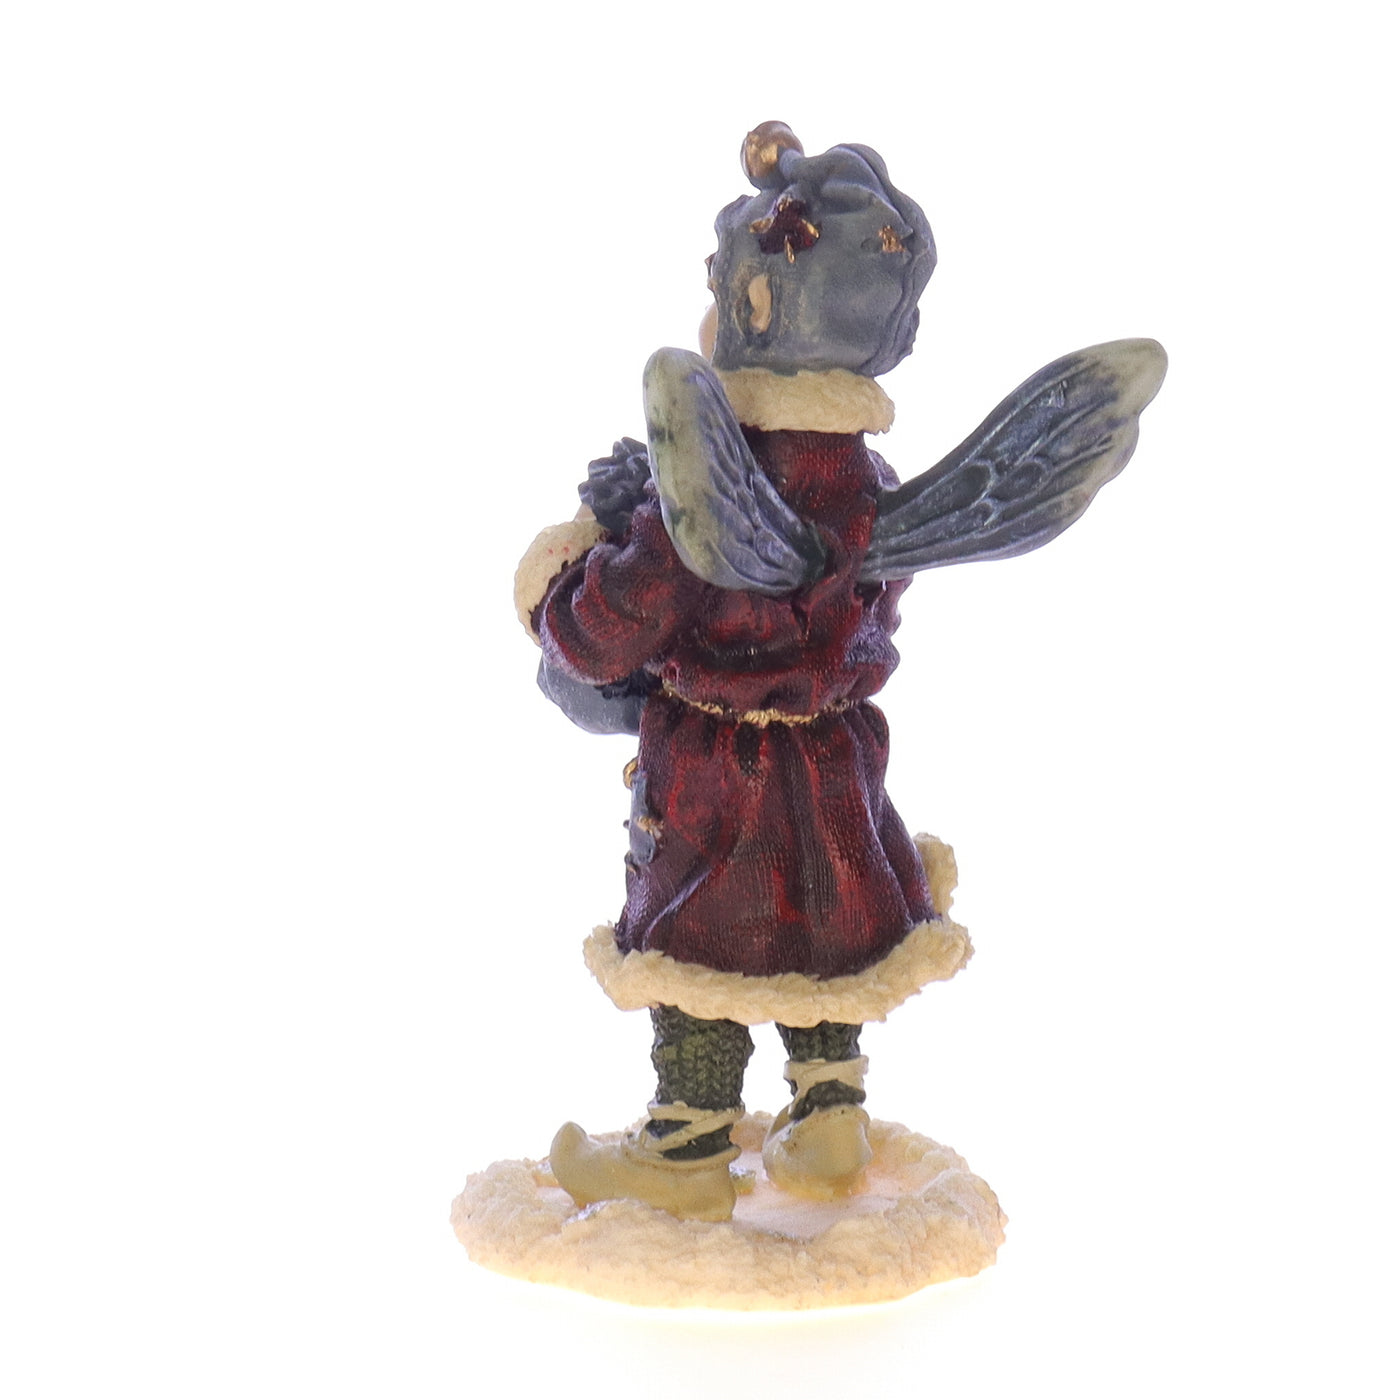 The_Wee_Folkstone_Collection_36002_Kristabell_Faeriefrost_Christmas_Figurine_1997 Back Left View